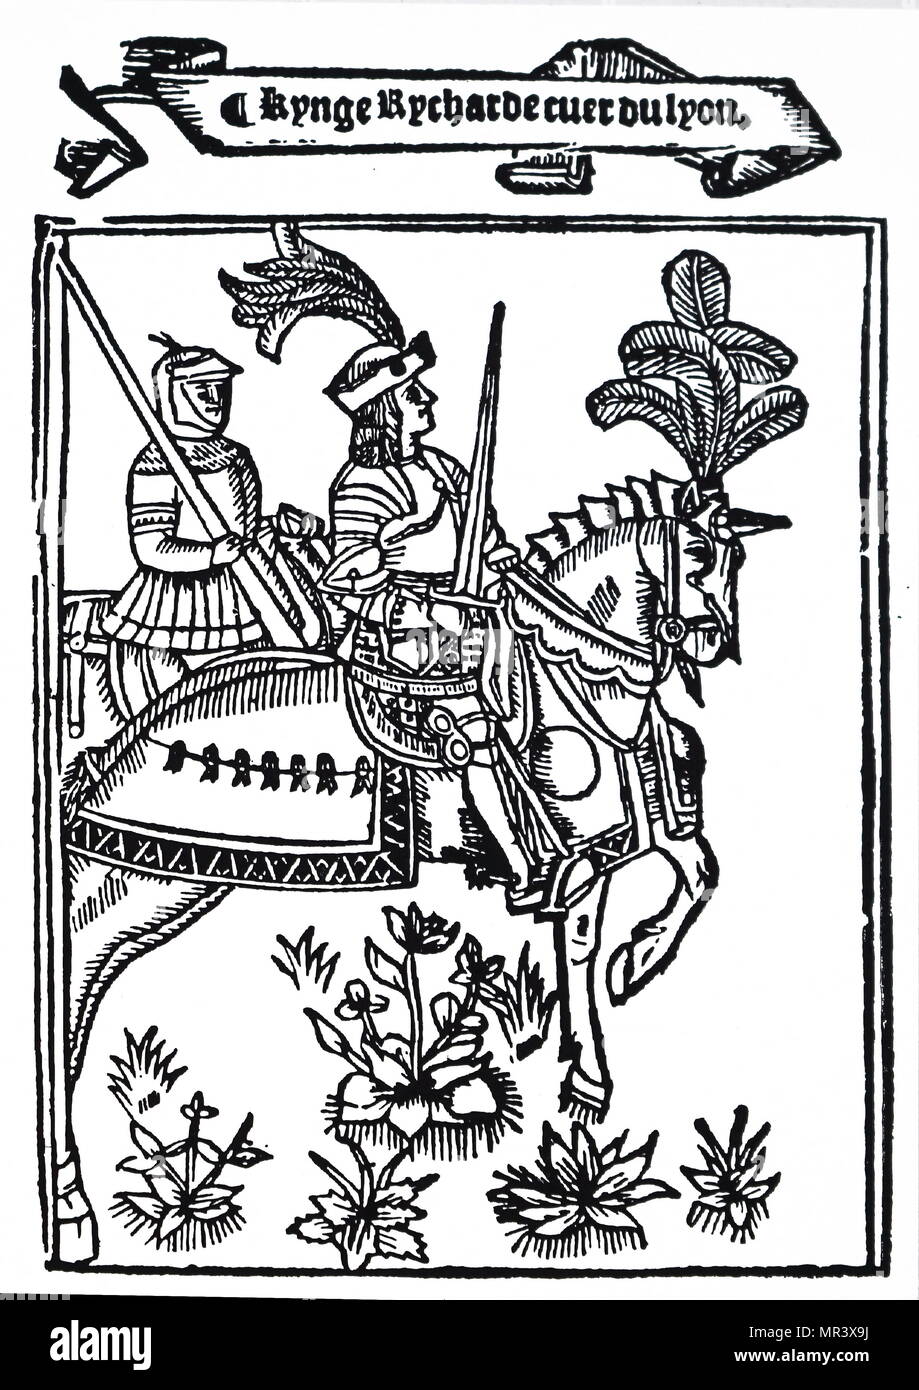 Woodcut depicting Richard I of England (1157-1199) King of England until his death. Dated 16th century Stock Photo